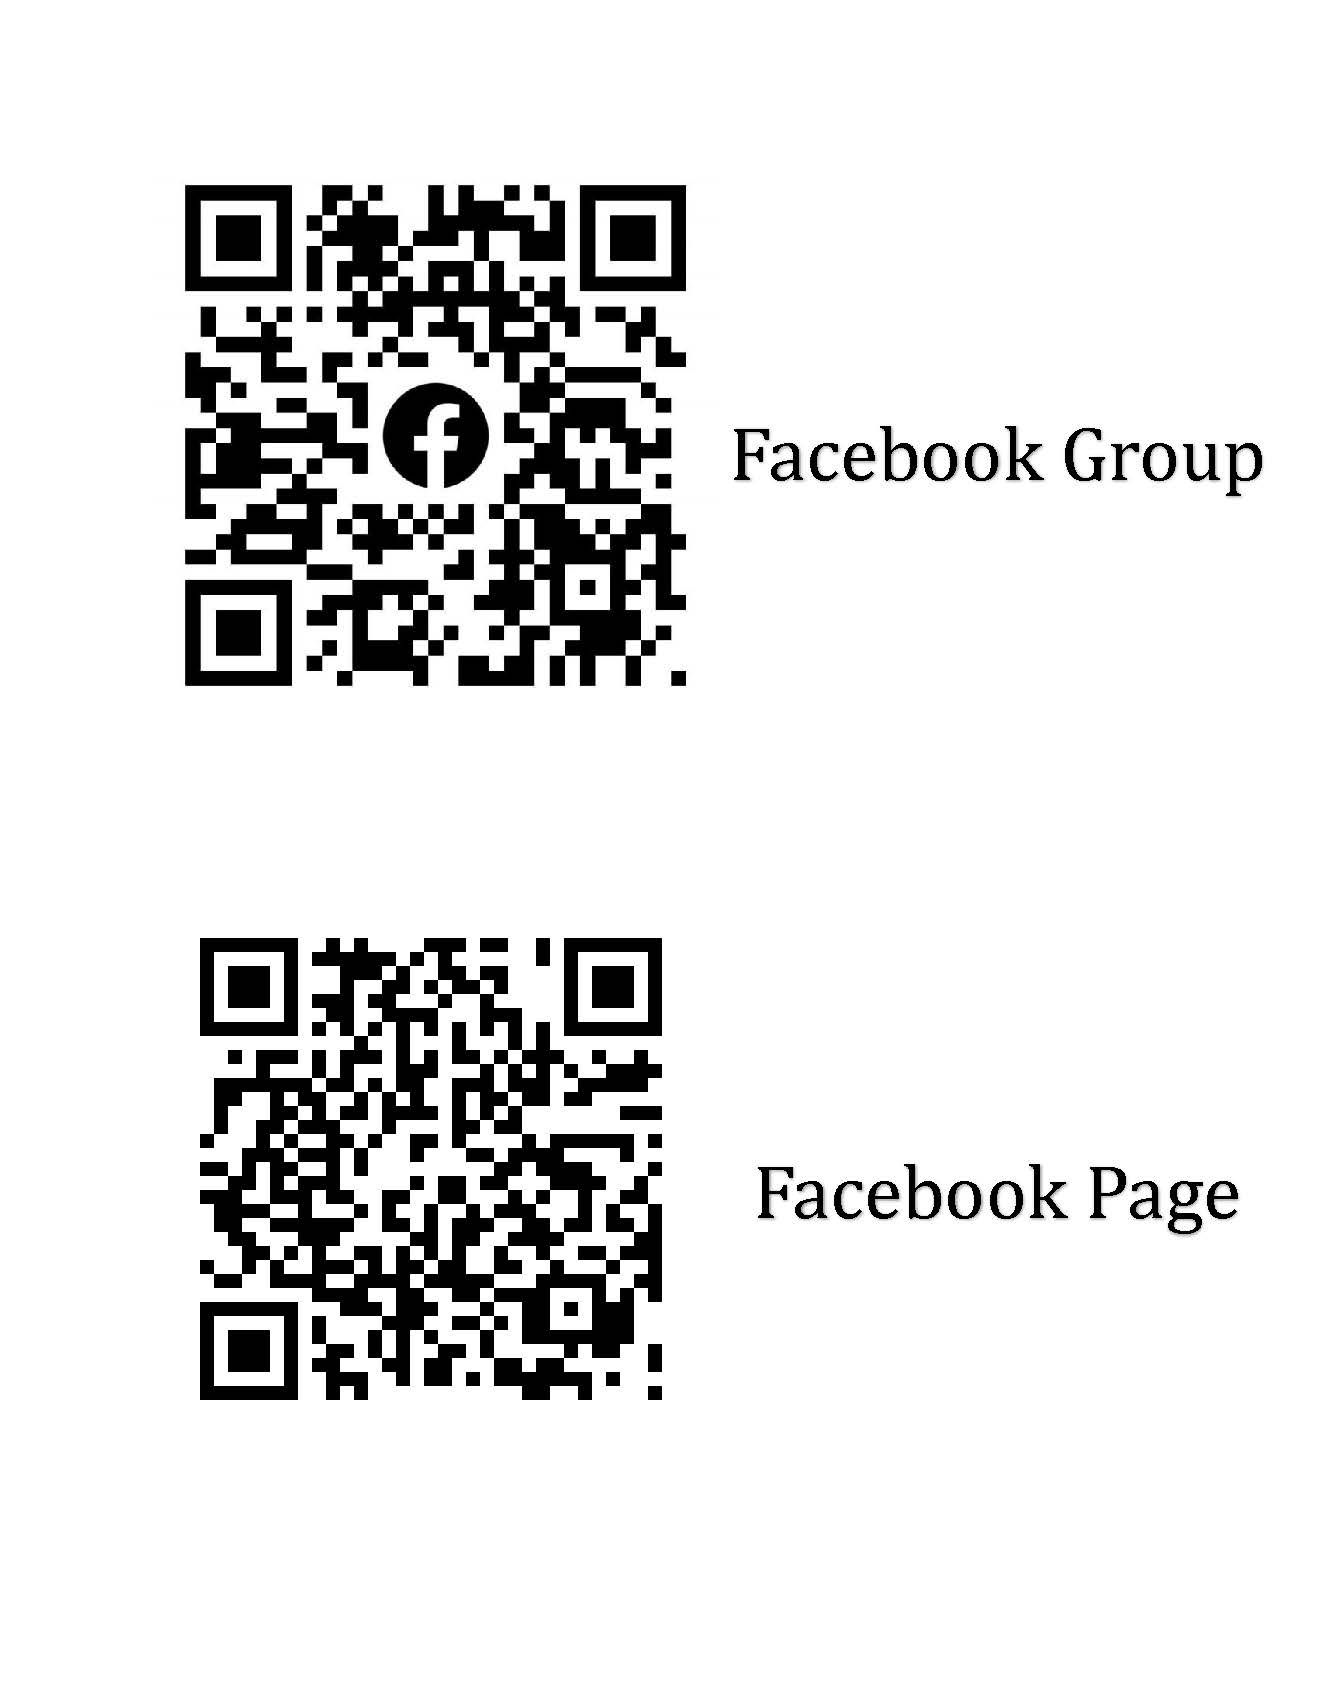 Qr codes for page and group